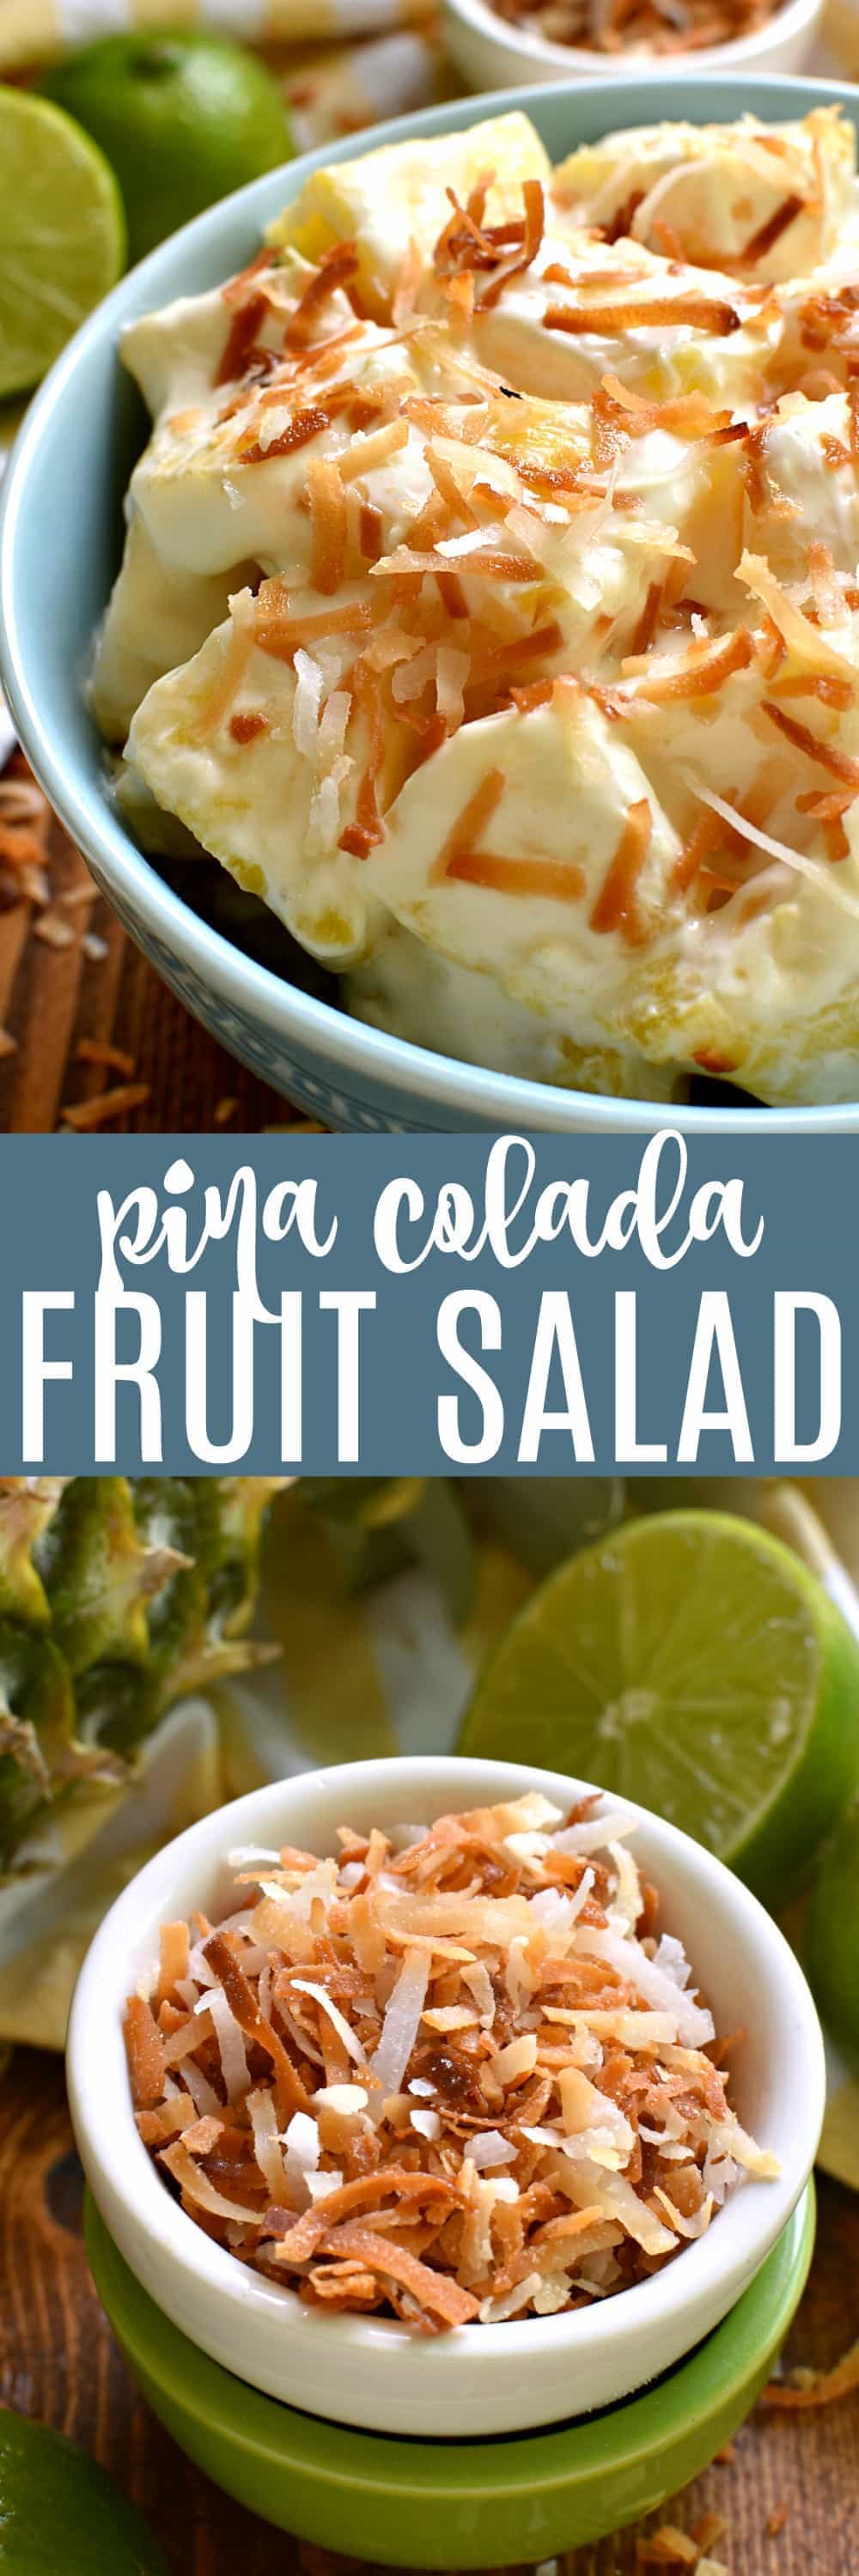 This Pina Colada Fruit Salad is the perfect taste of summer! Made with just 5 ingredients and ready in 10 minutes, this salad is ideal for summer picnics, parties, or lazy days by the pool!